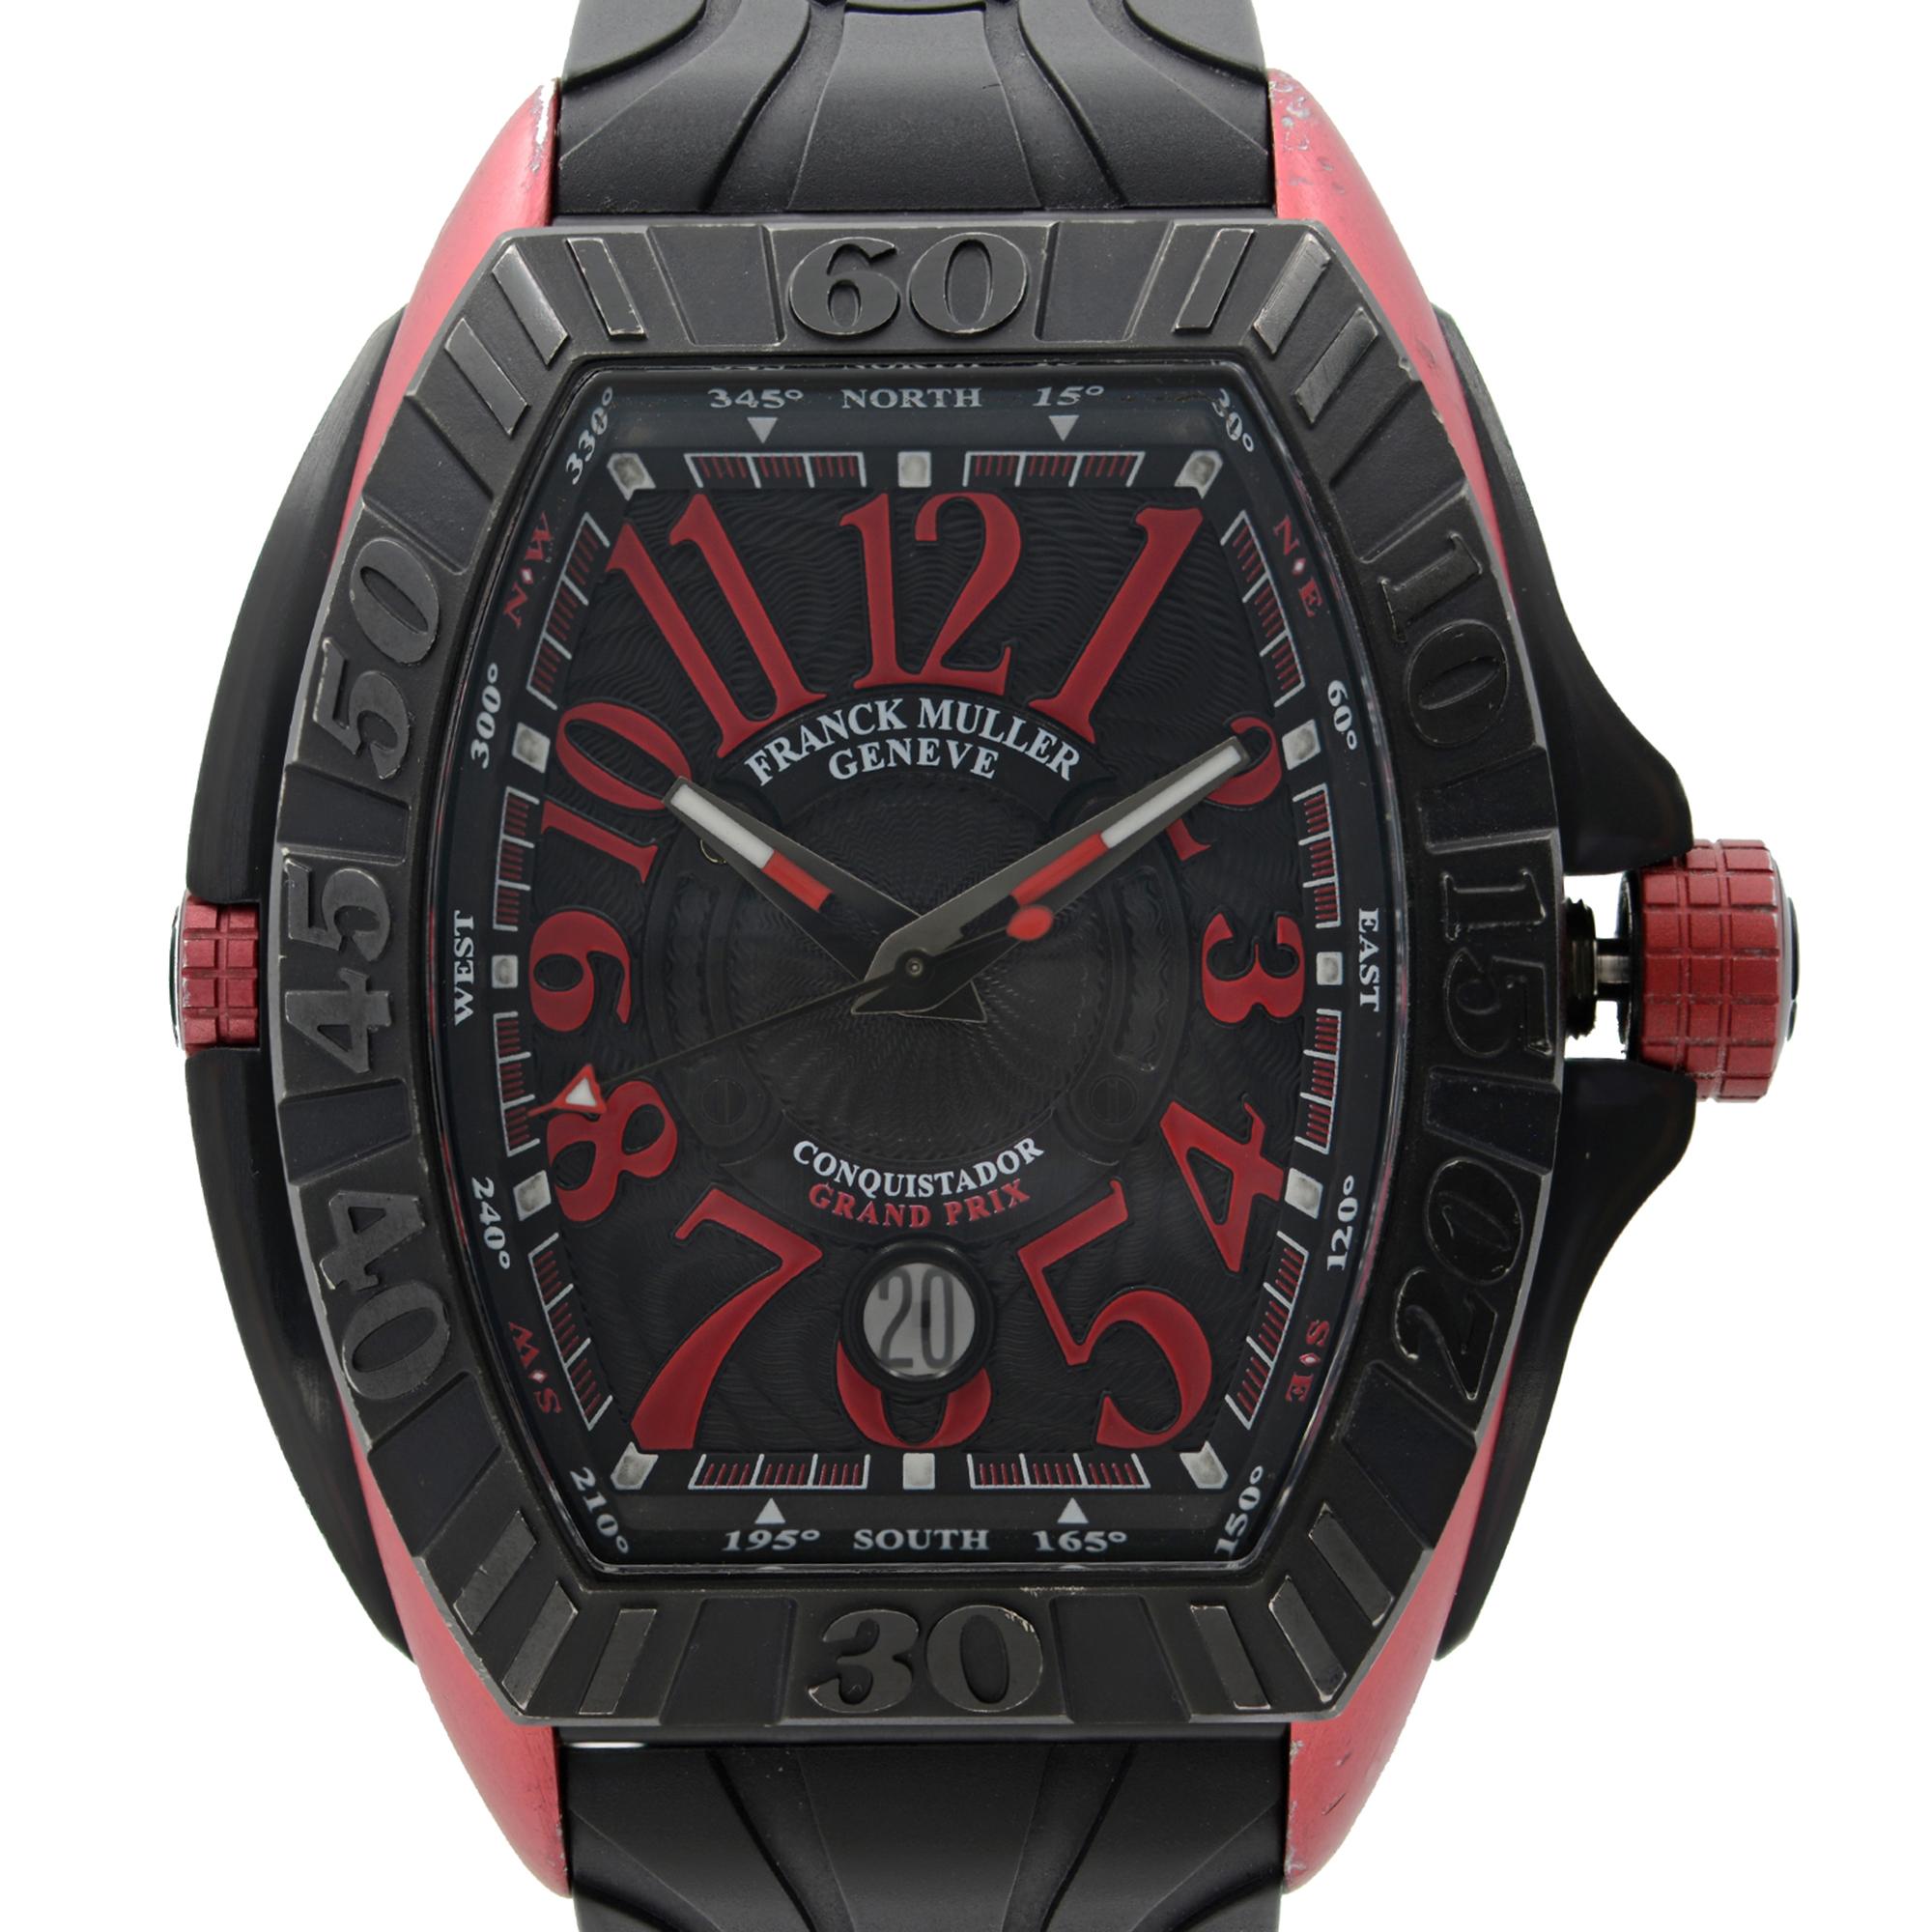 Pre-owned Franck Muller Conquistador Grand Prix Titanium Black Dial Men's Watch 8900 SC DT GPG. The Watch Case and Bezel Show Significant Scuffs and Dents as Seen in the Pictures, The Buckle Has Heavy Scratches, and The Crown Has Moderate Scuffs on